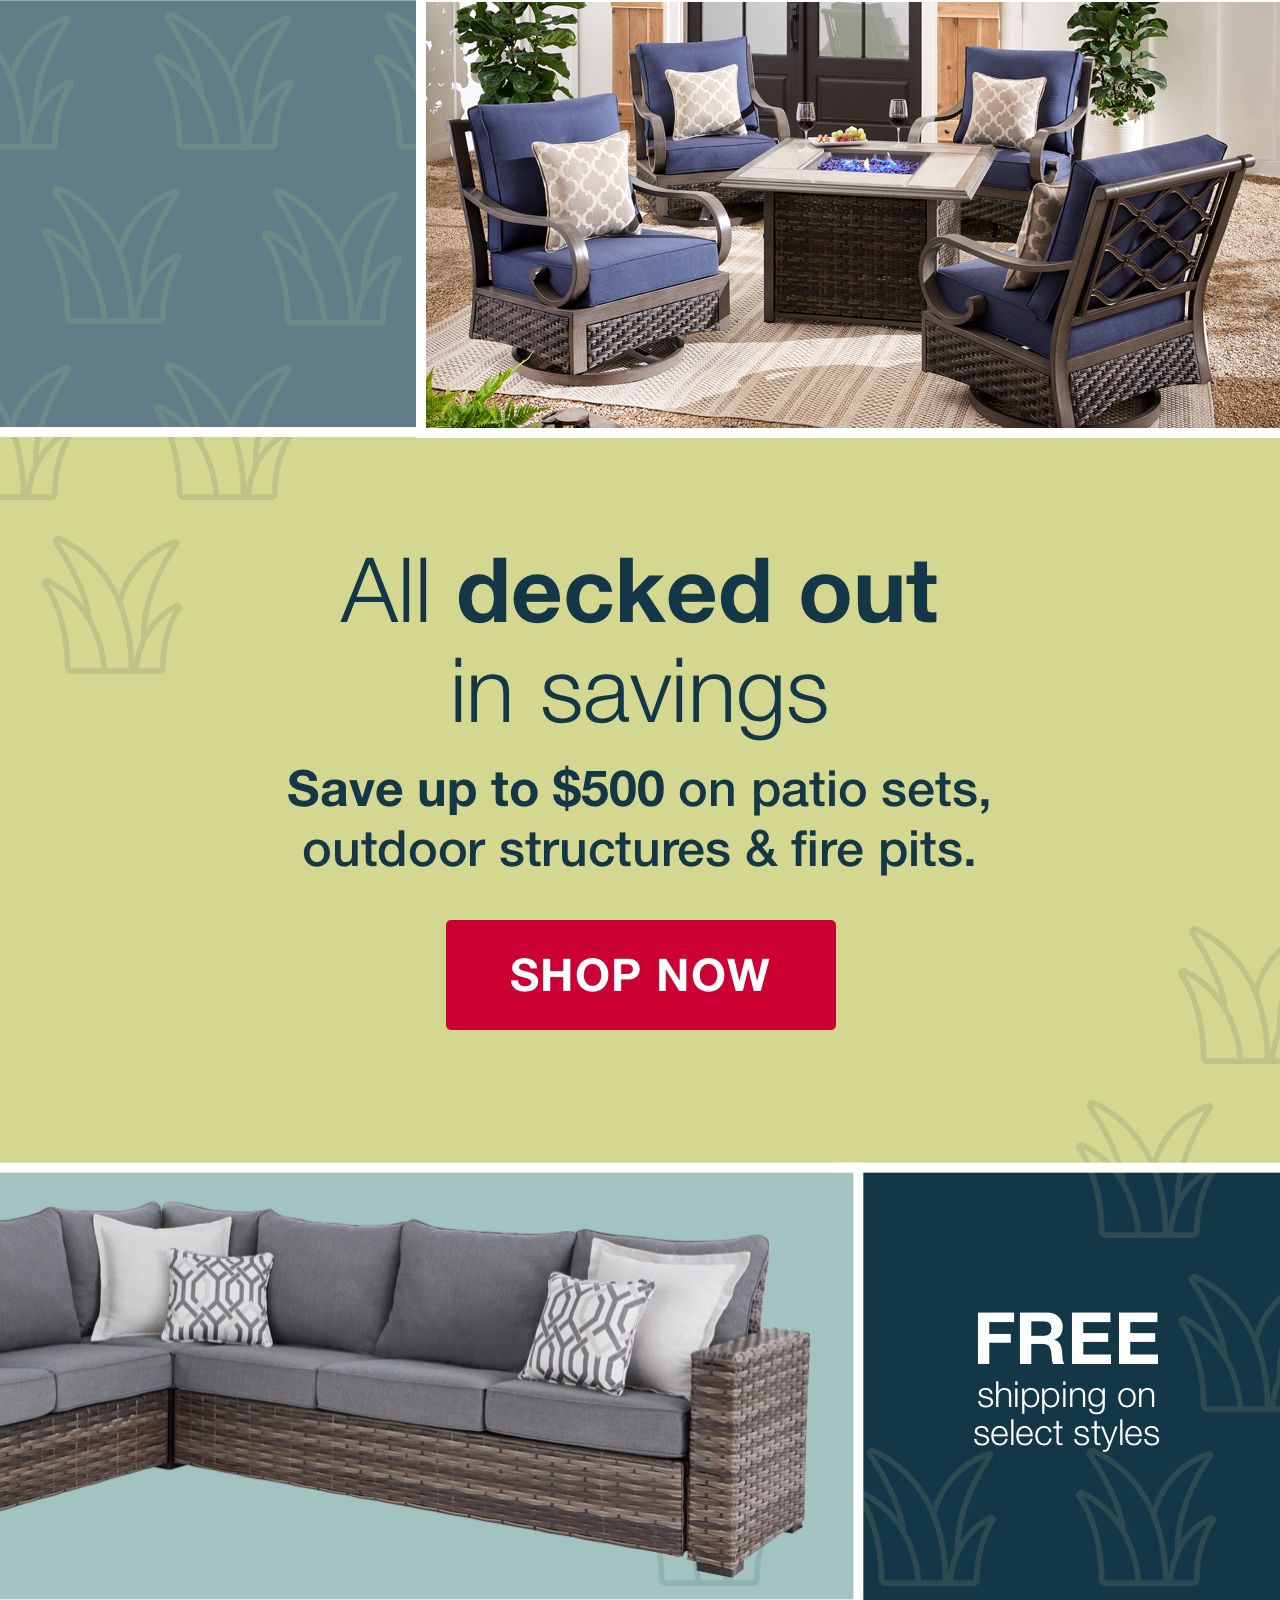 All decked out in savings. Save up to $500 on patio sets, outdoor structures and fire pits. Click to shop now